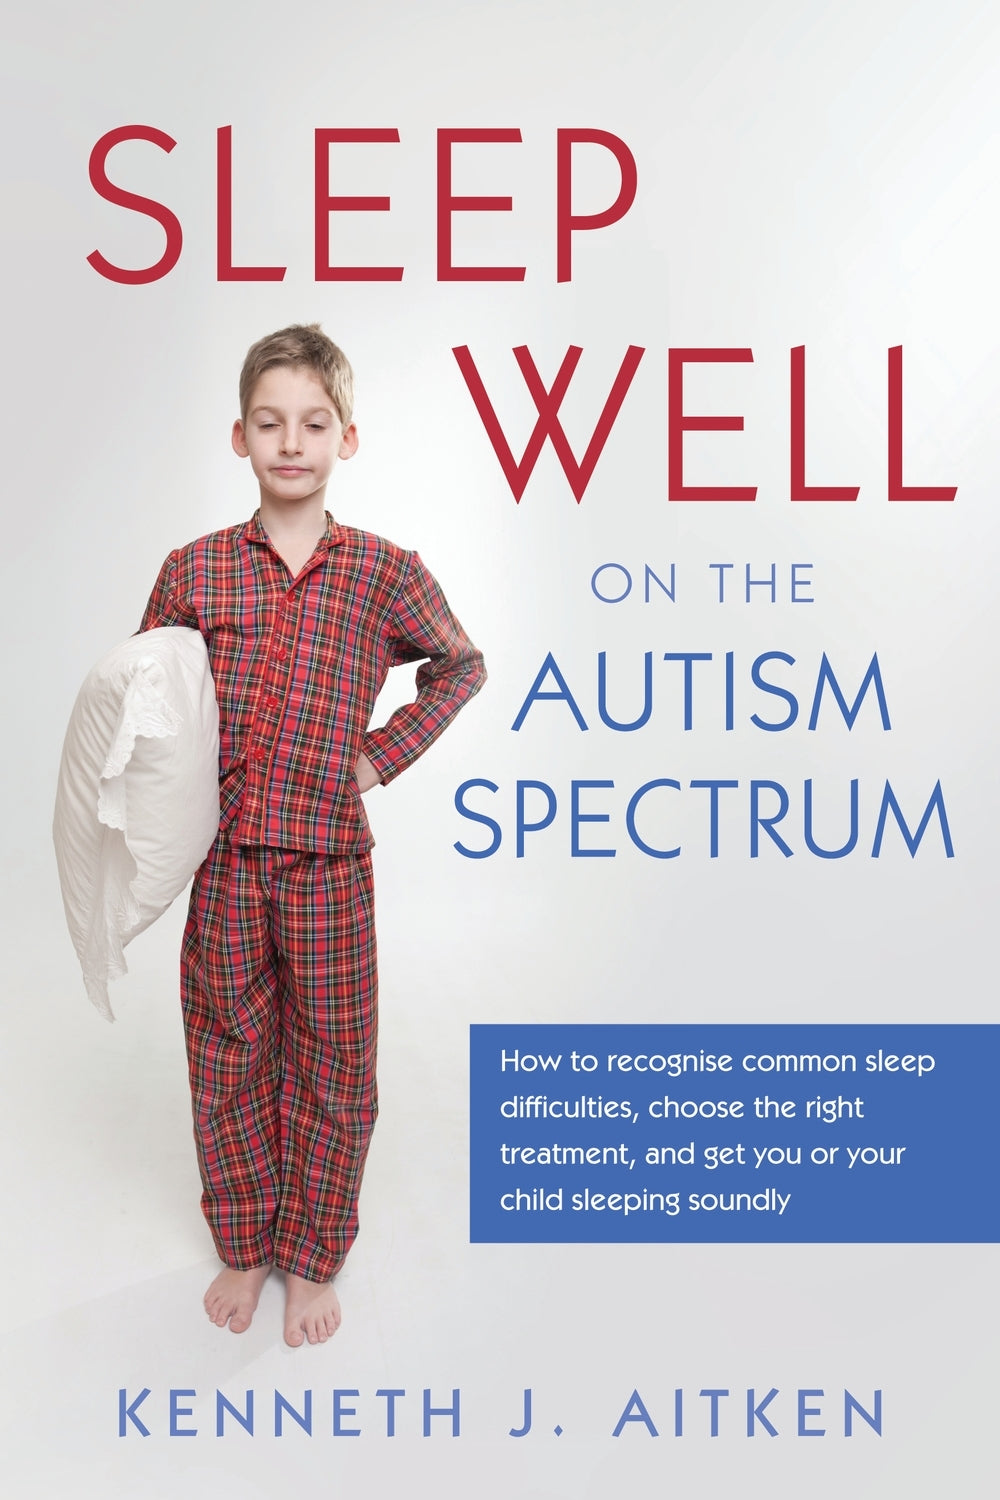 Sleep Well on the Autism Spectrum by Kenneth Aitken